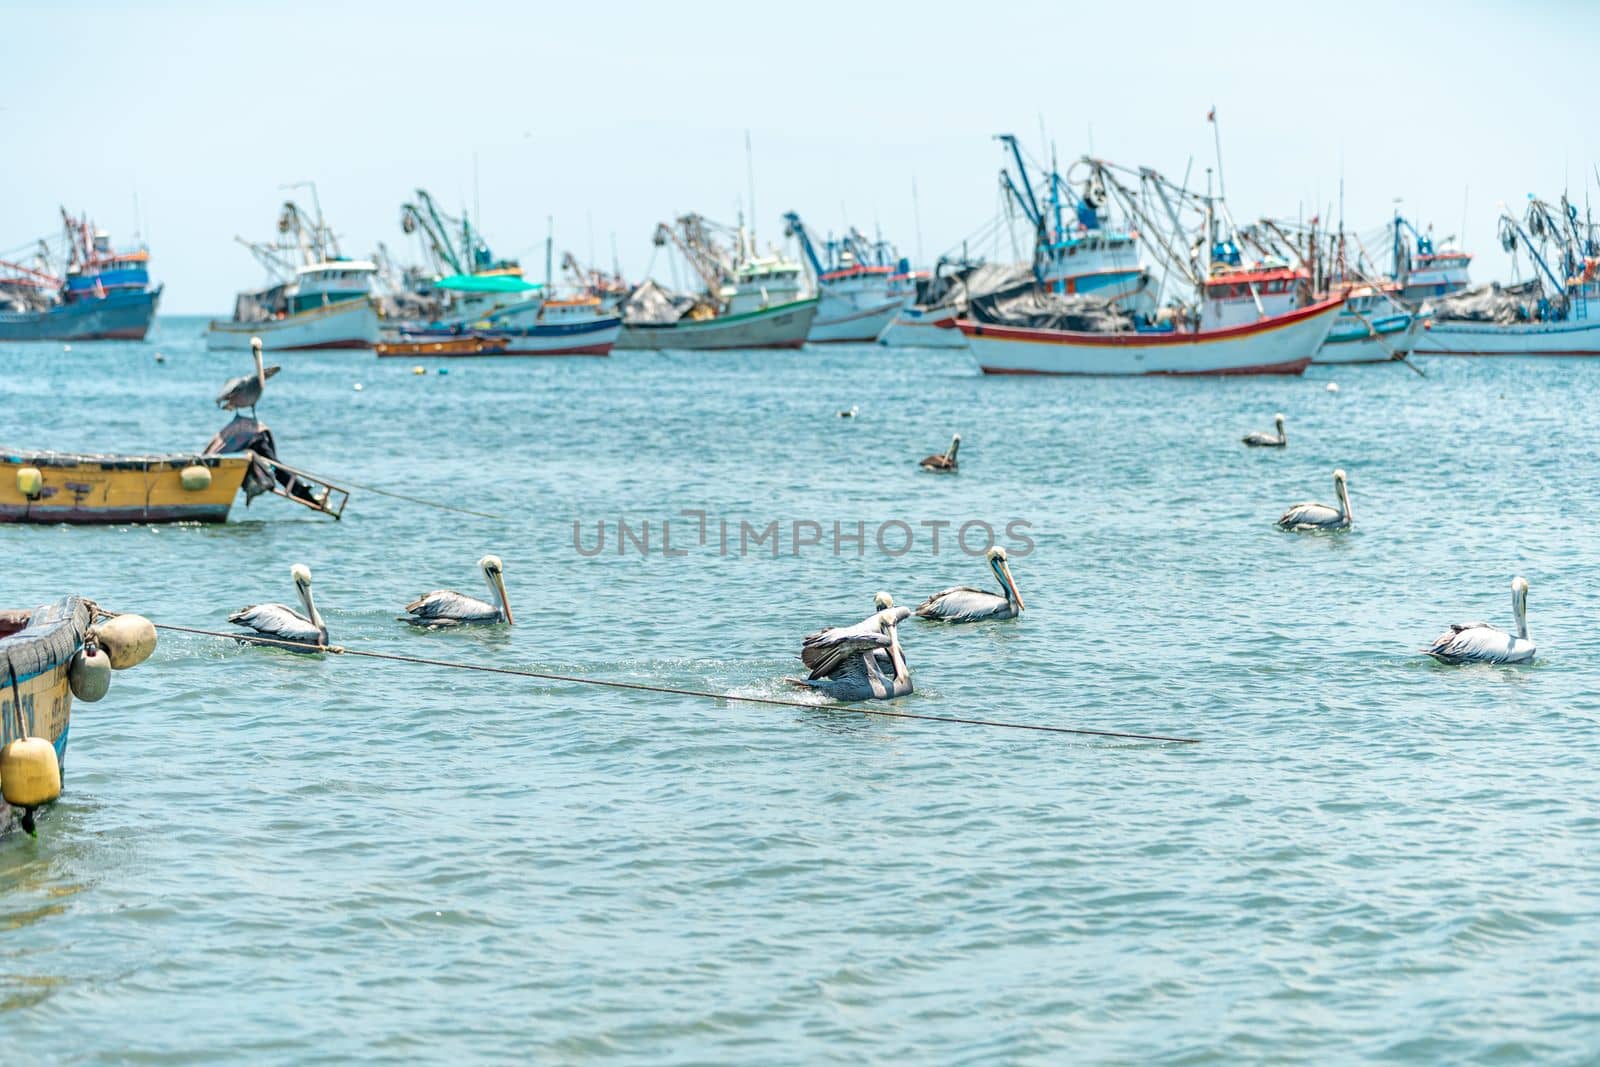 fishing boats and pelicans in the ocean  by Edophoto